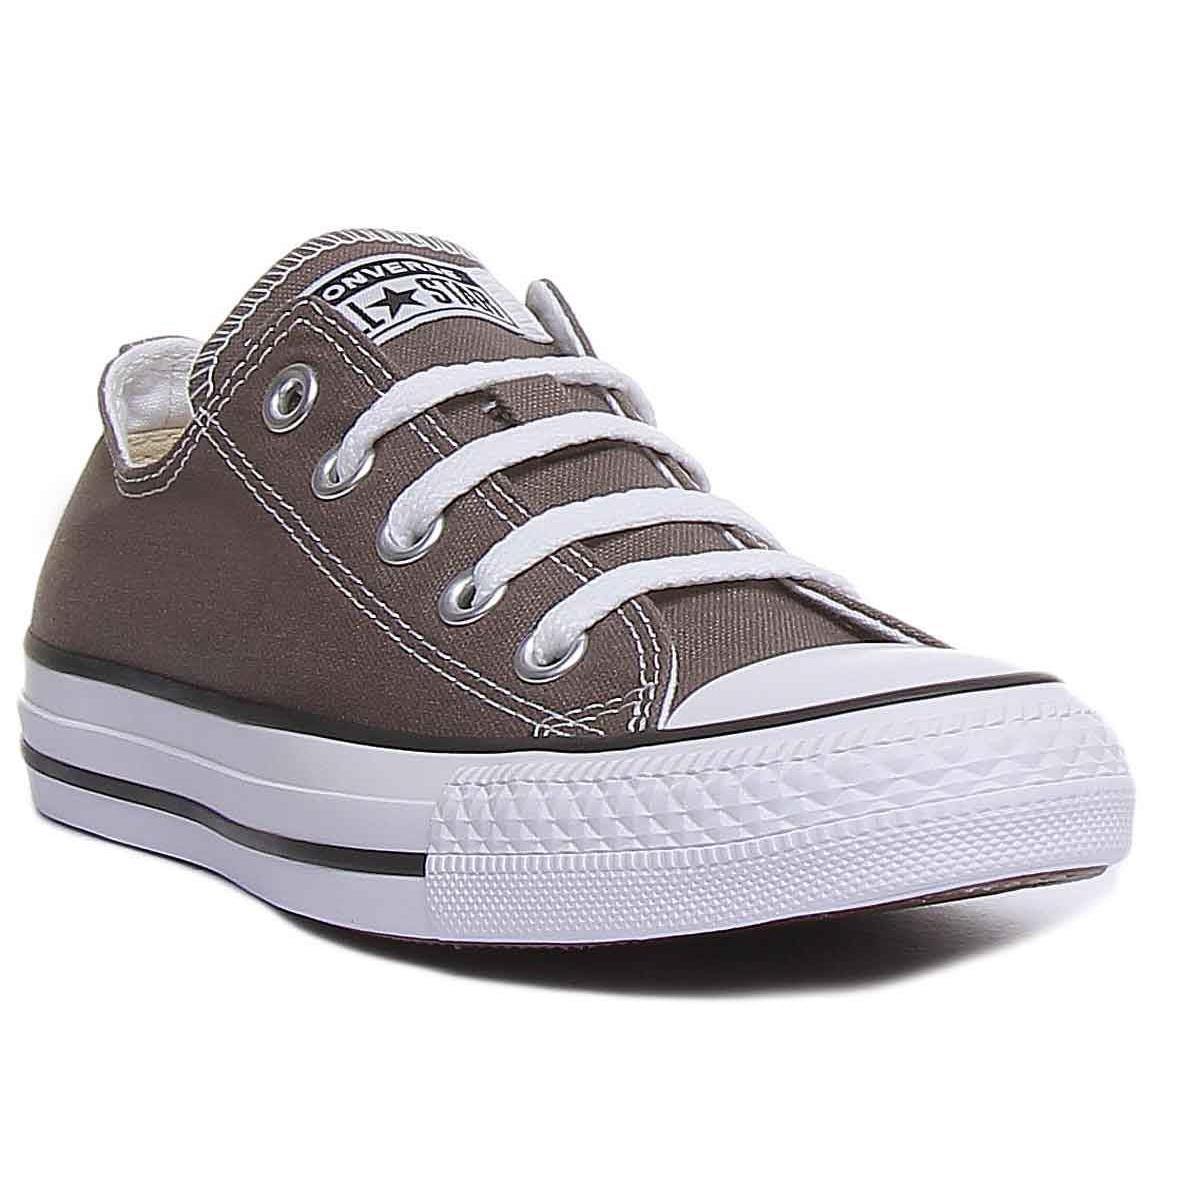 Converse All Star Ox All Star Ox Core 3-7 Charcoal In Charcoal Size US 5 - 11 Charcoal